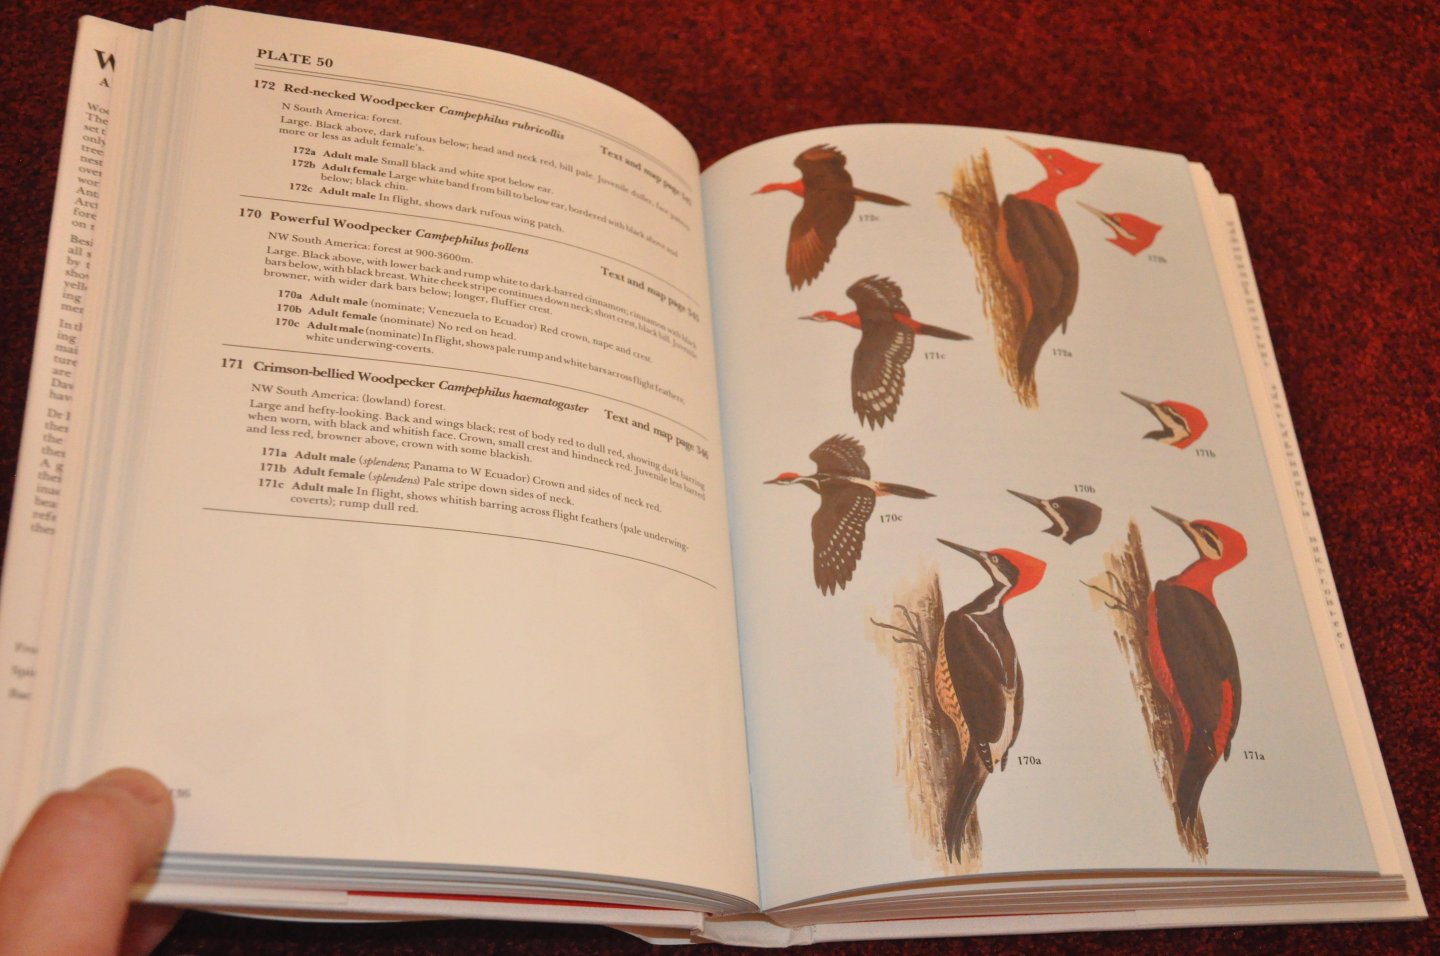 Winkler, Hans / Christie, David A. / Nurney, David - Woodpeckers. An Identification Guide to the Woodpeckers of the World